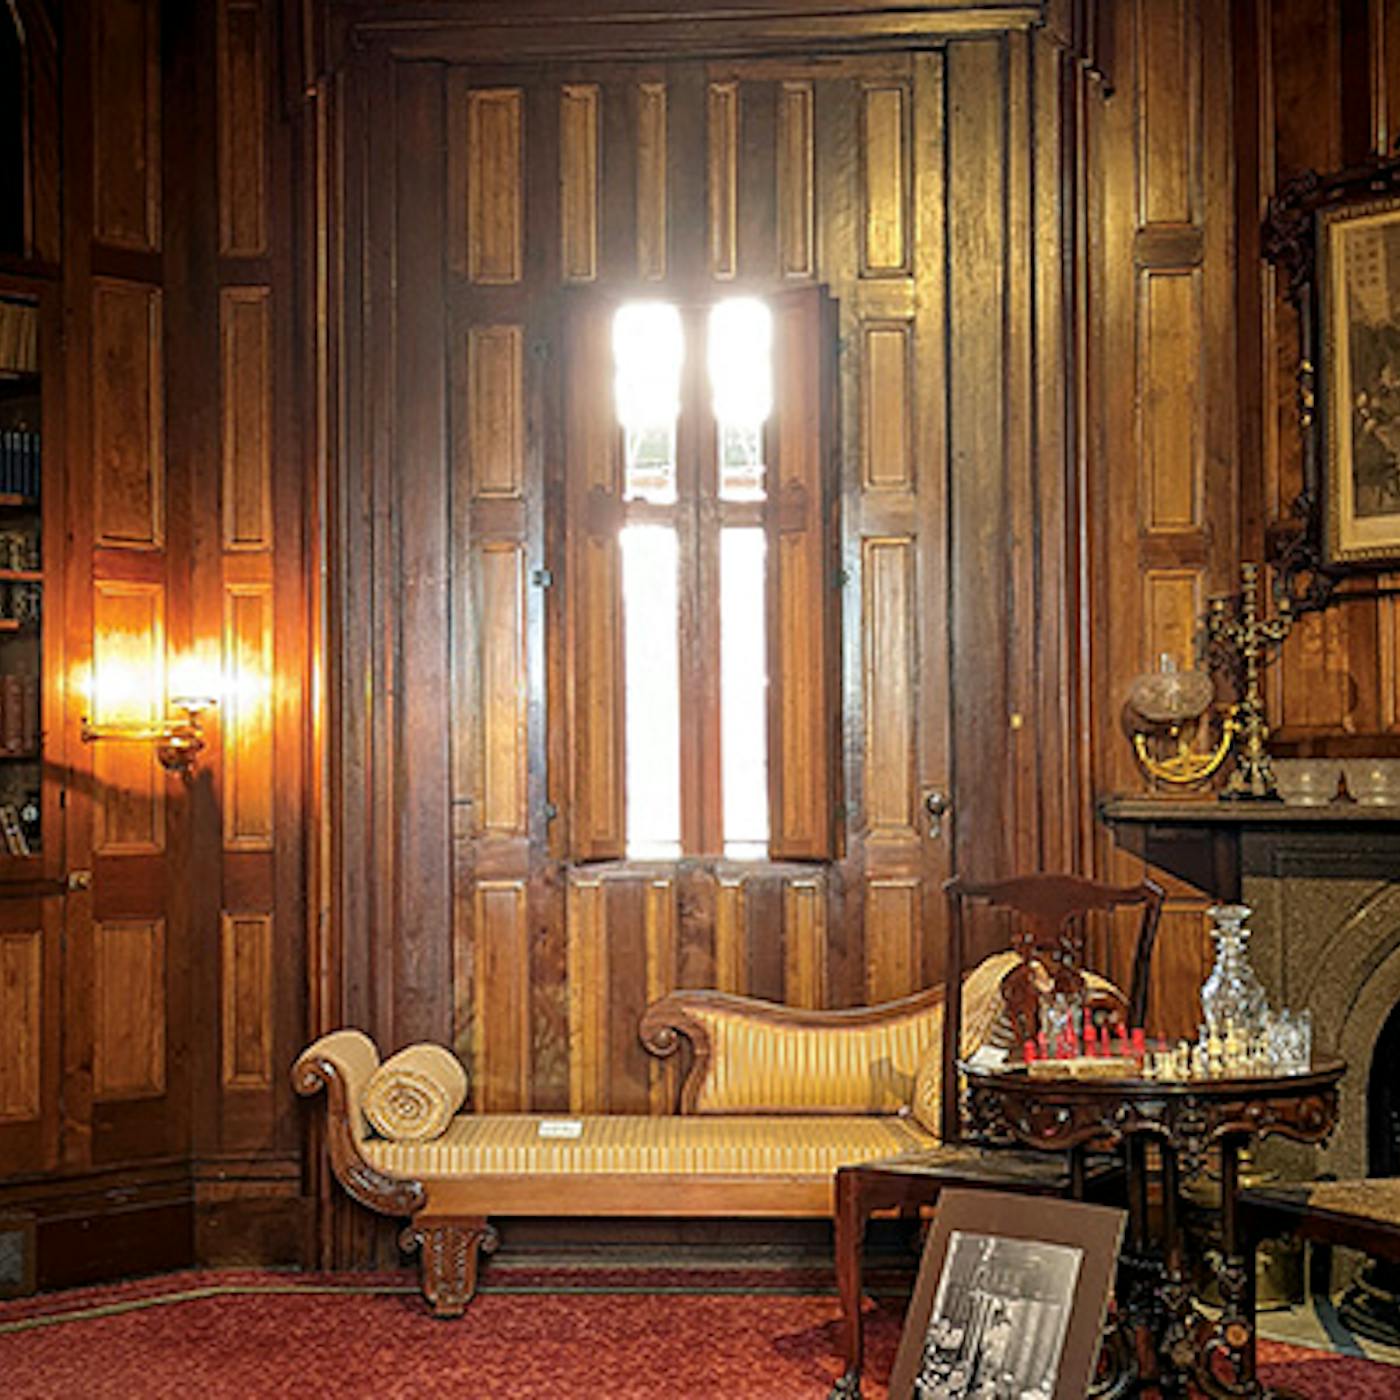 Interior of The Henry Clay Estate in Lexington, Kentucky (photo courtesy of The Henry Clay Estate))